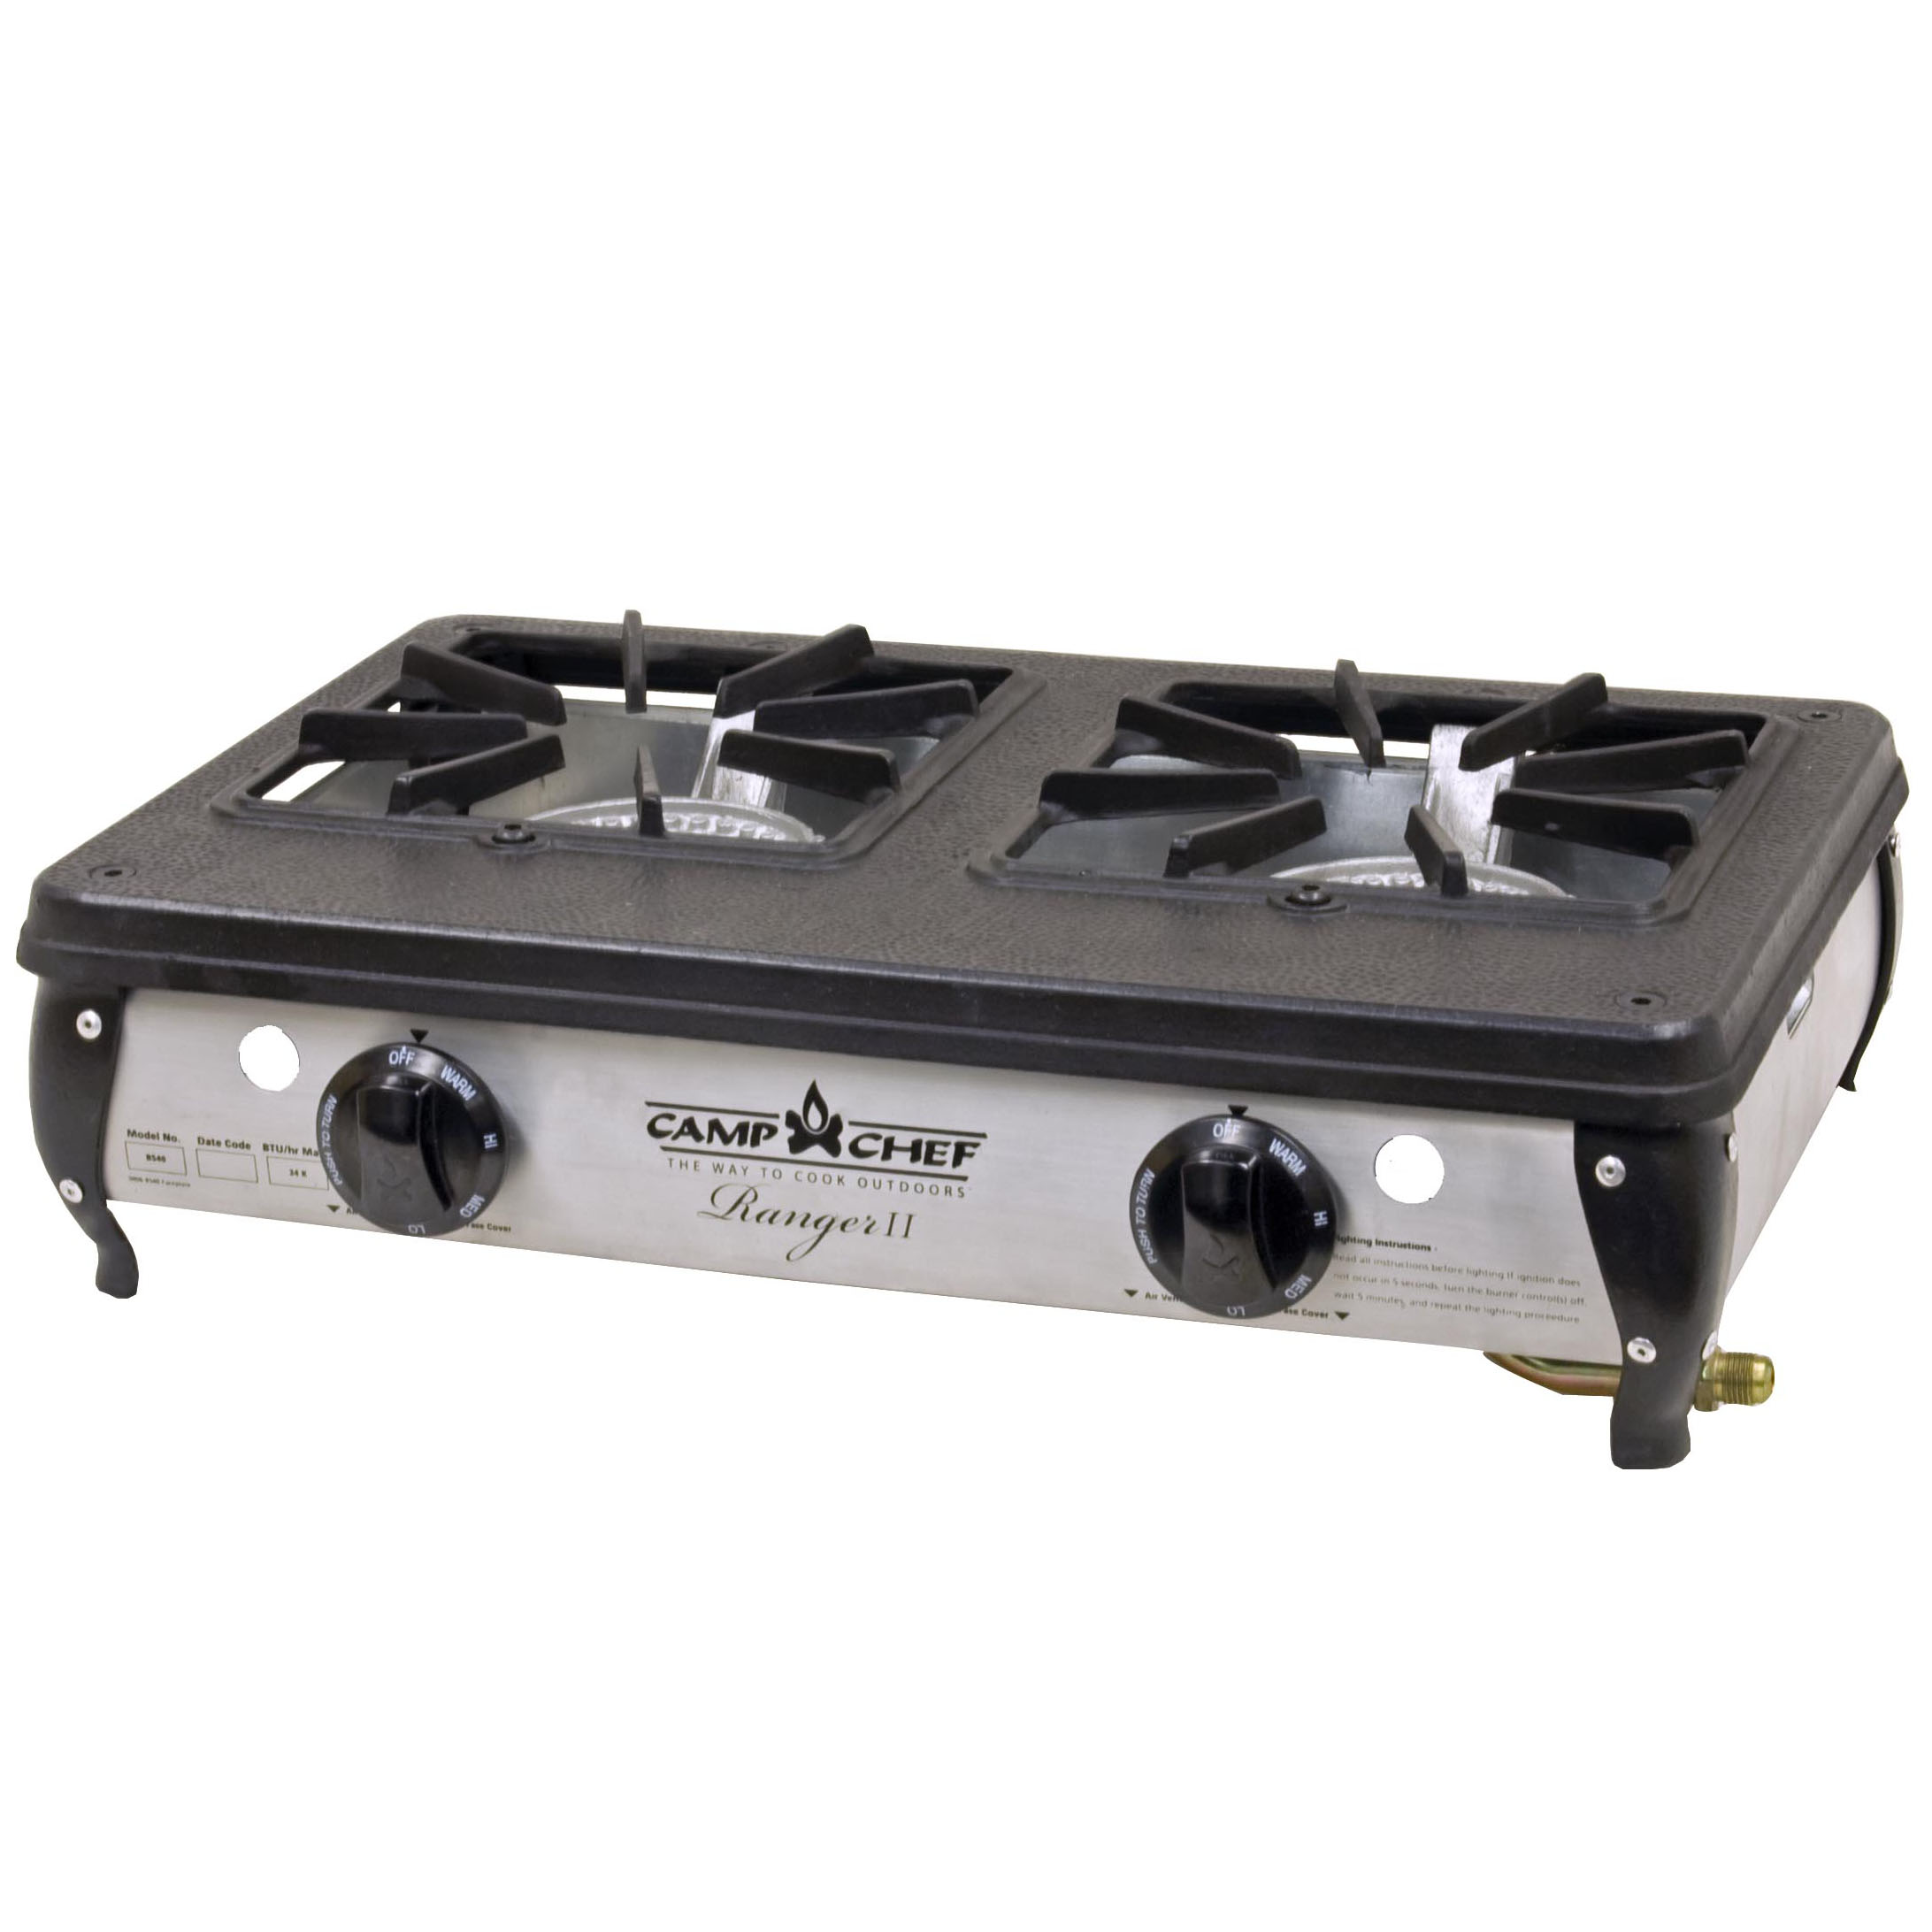 Camp Chef Ranger II Portable Outdoor 2 Burner Propane Stove, 34,000 BTU Total Output, 128 Sq Inch Cooking Area, BS40C - image 4 of 6